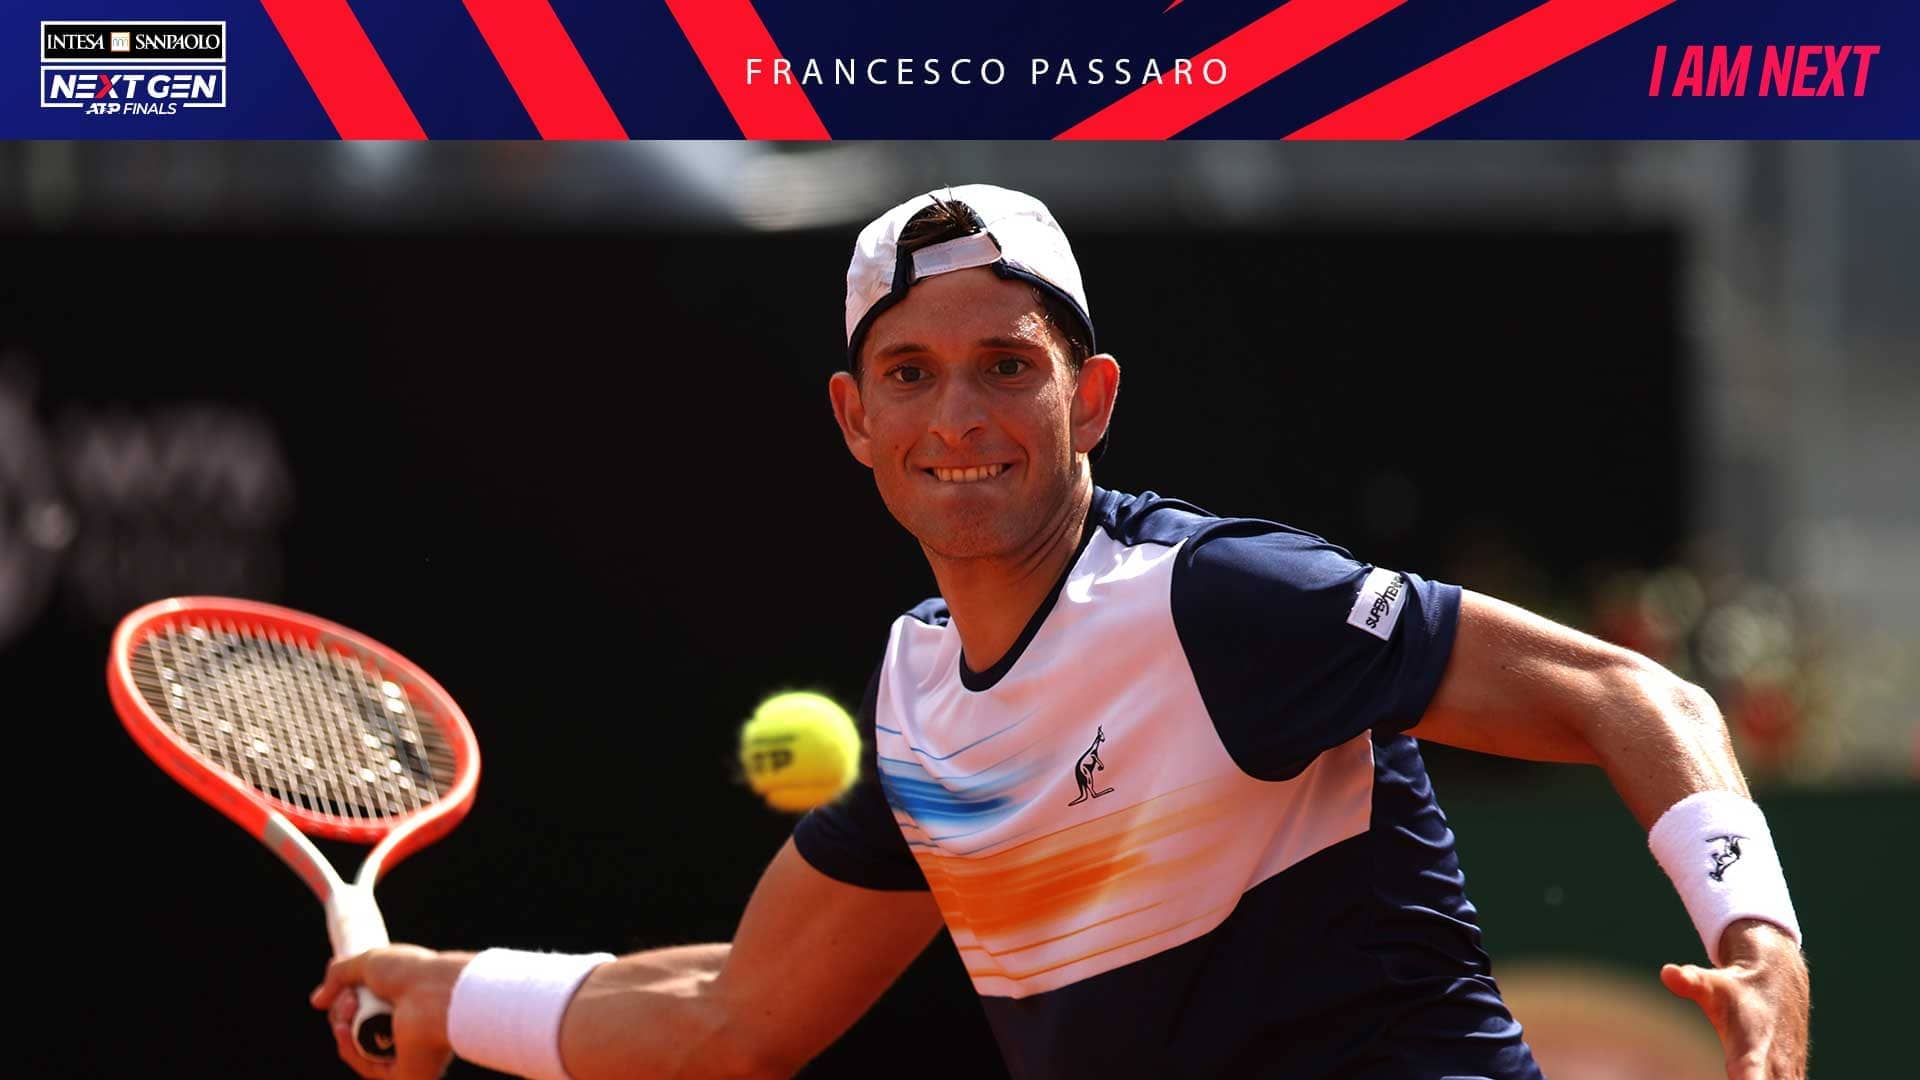 Francesco Passaro is at a career-high No. 122 in the Pepperstone ATP Rankings.